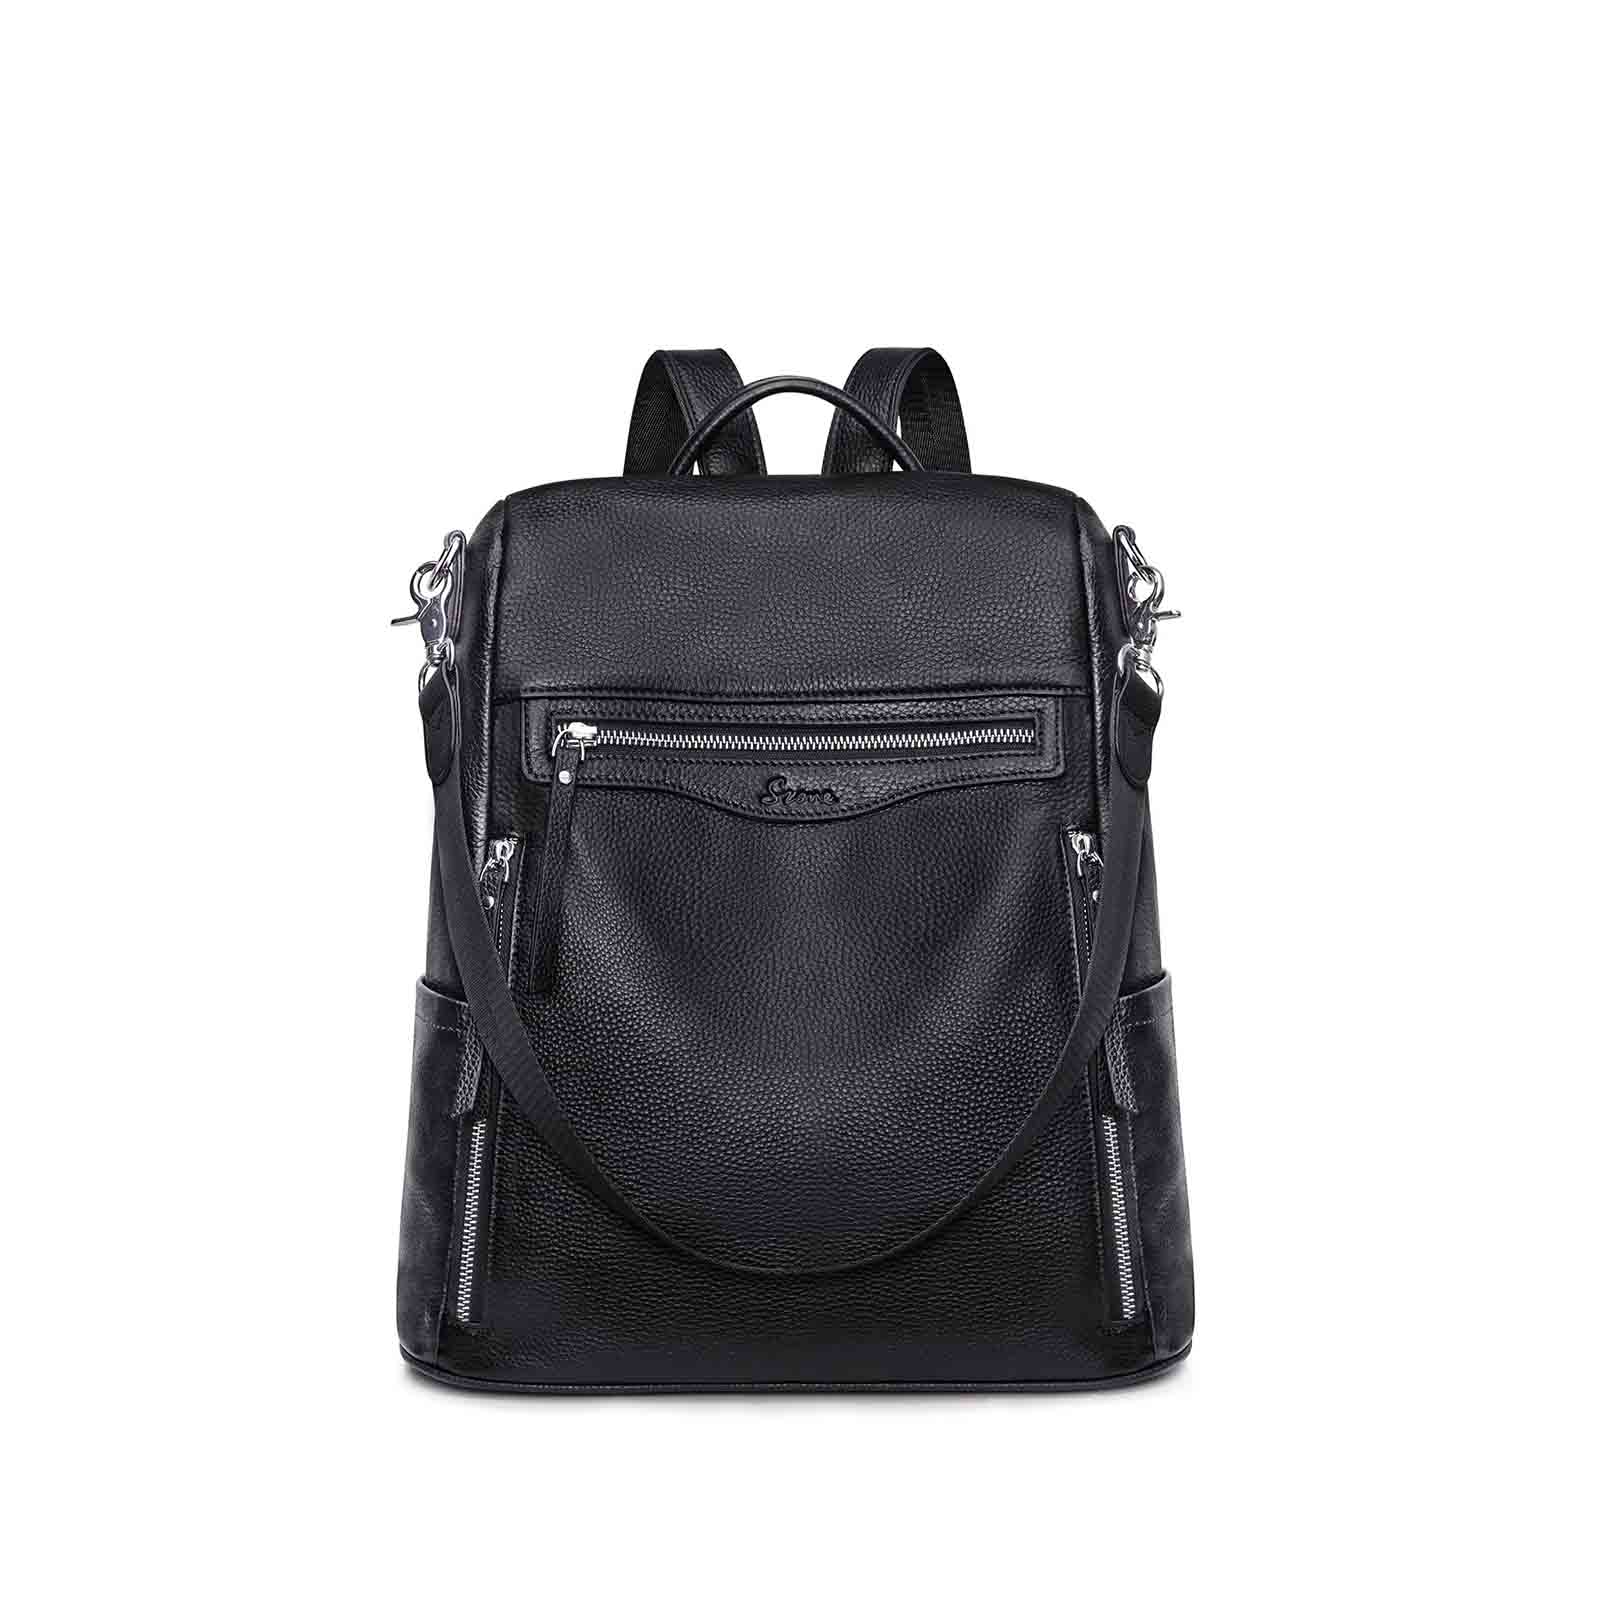 Soft College Leather Backpack